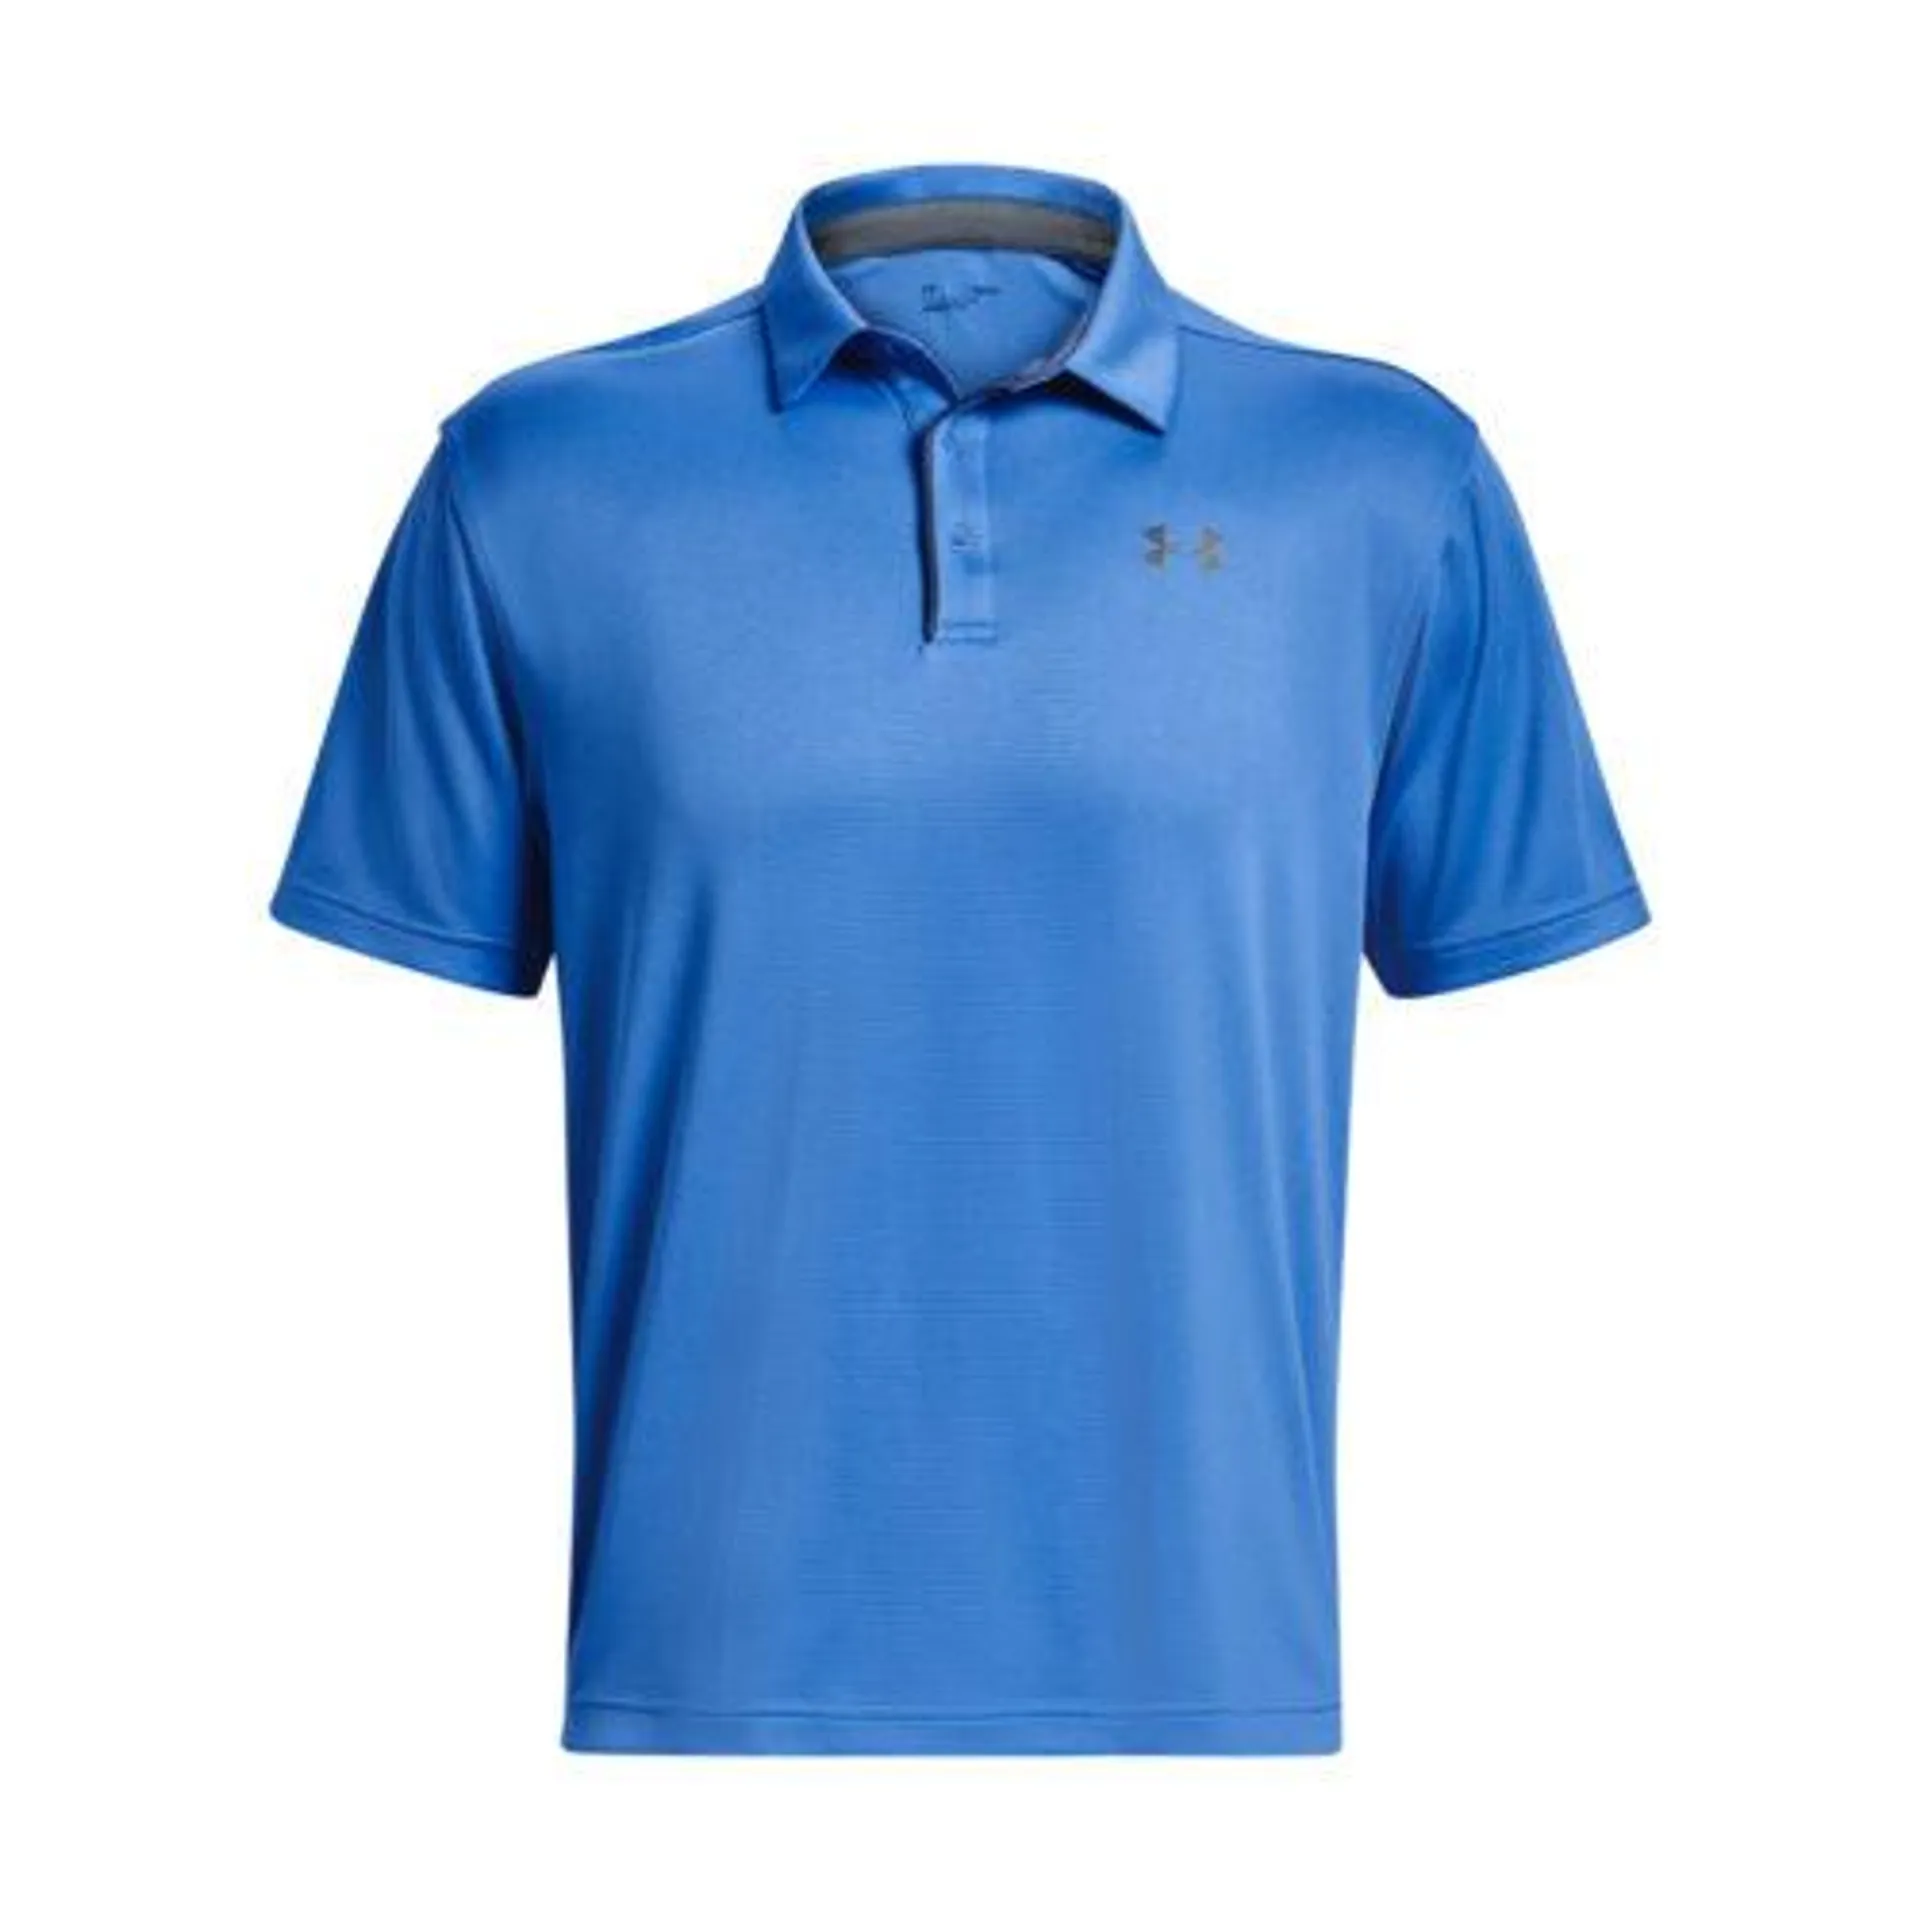 Under Armour Tech Polo Shirt – Water/Pitch 1290140-469